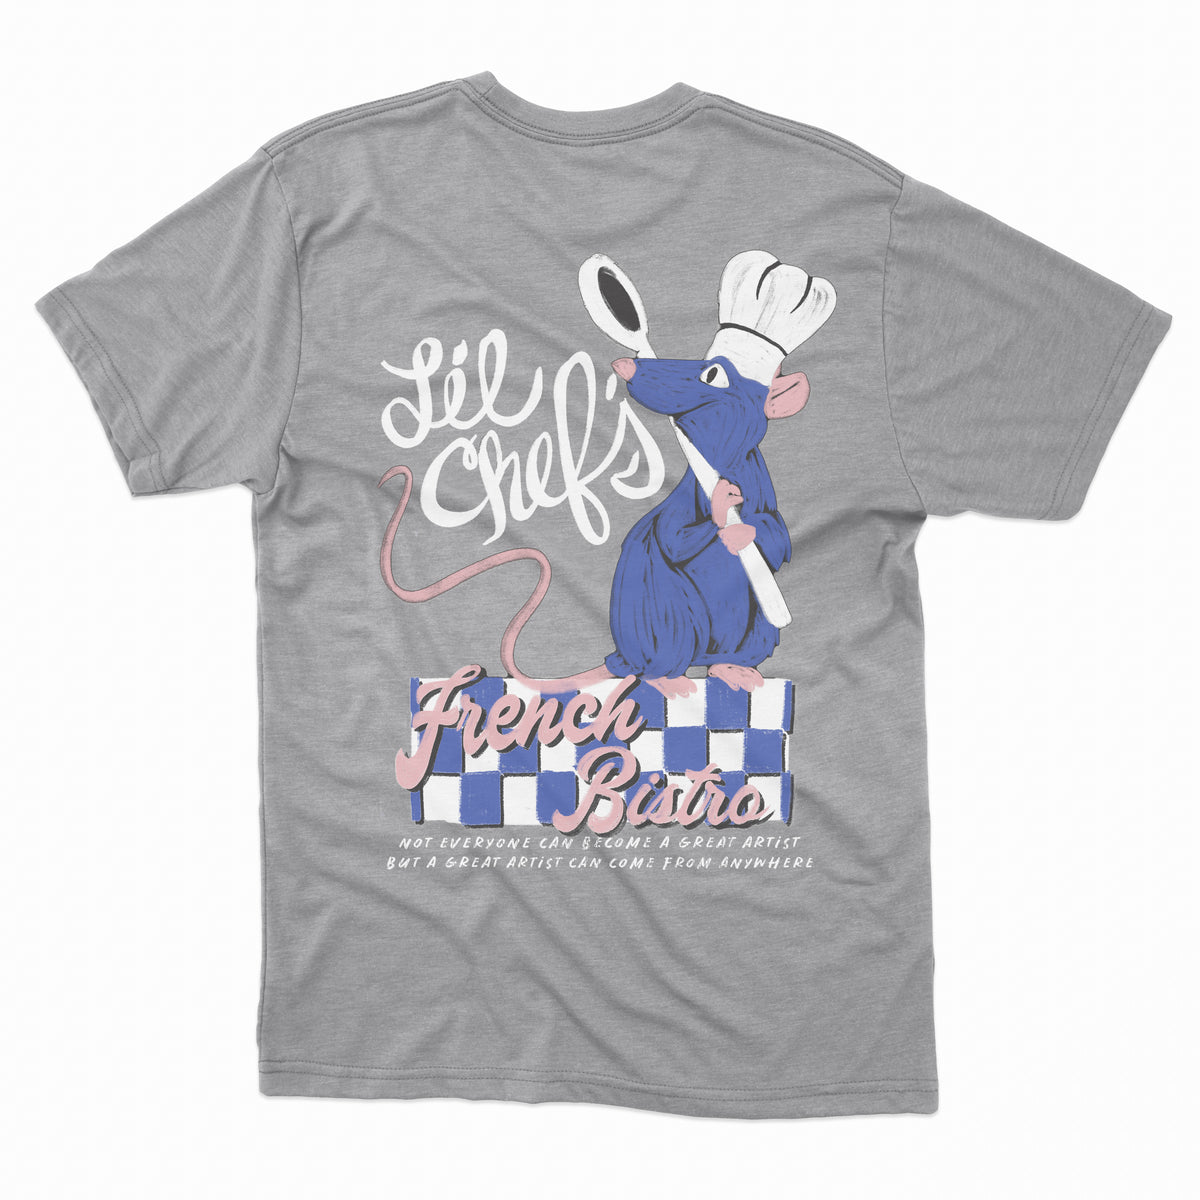 Lil Chef’s Bistro Tee